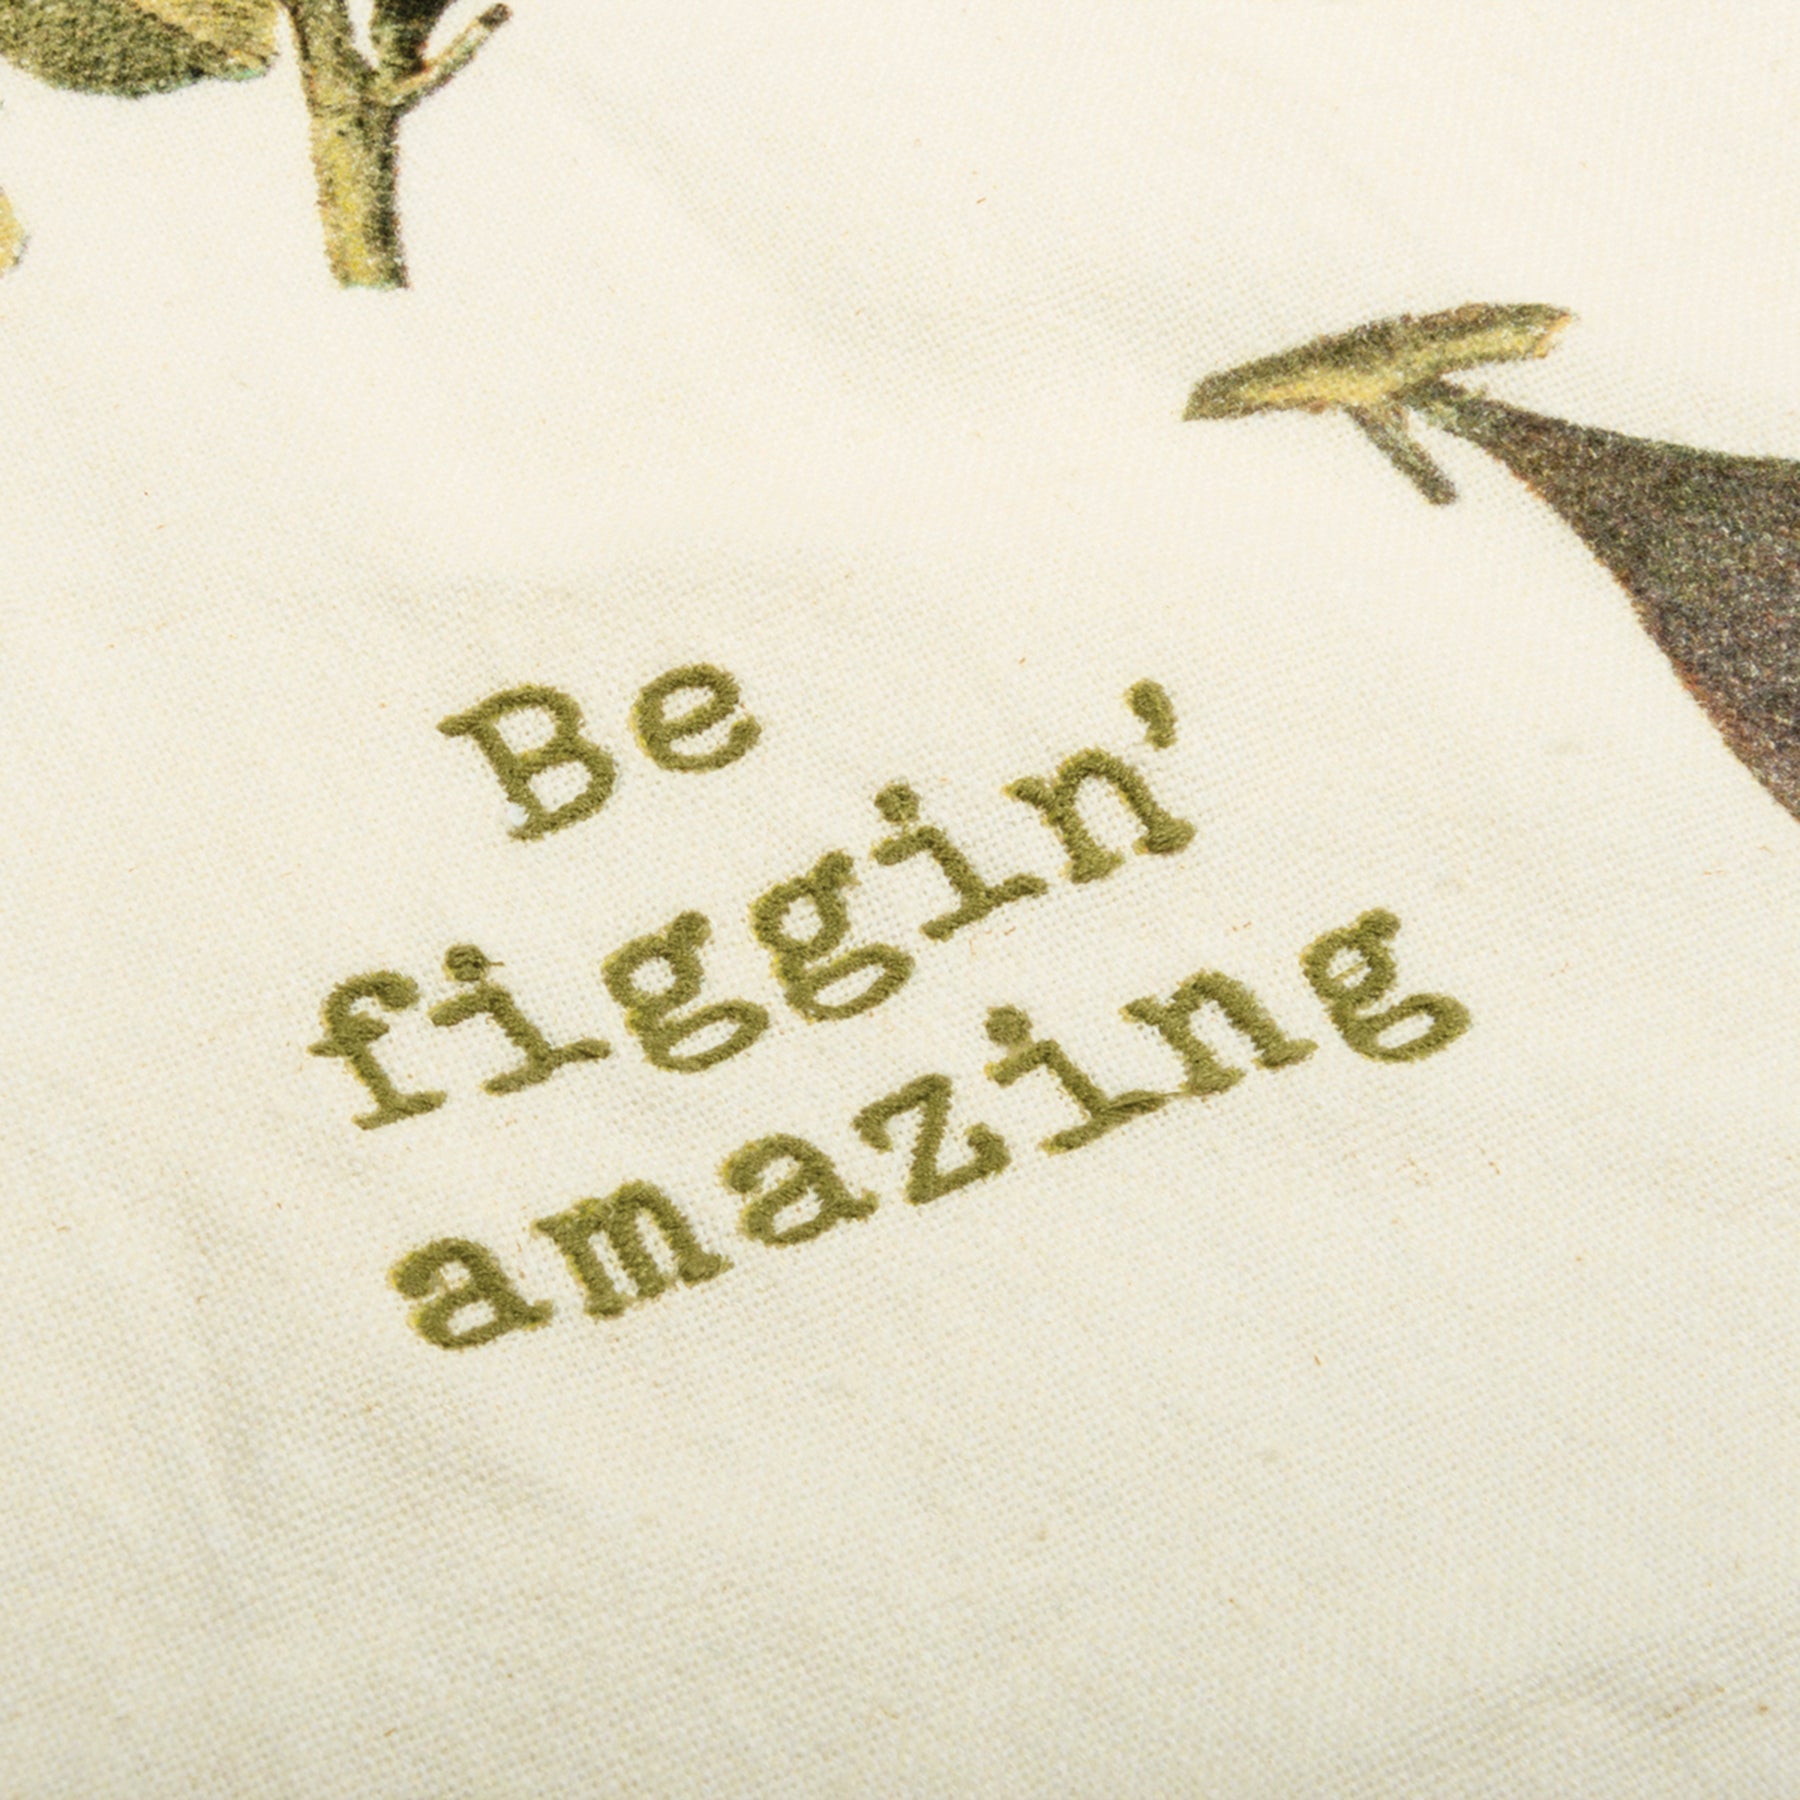 Be Figgin' Amazing Dish Cloth Towel | Cotten Linen Novelty Tea Towel | Embroidered Text | 18" x 28"